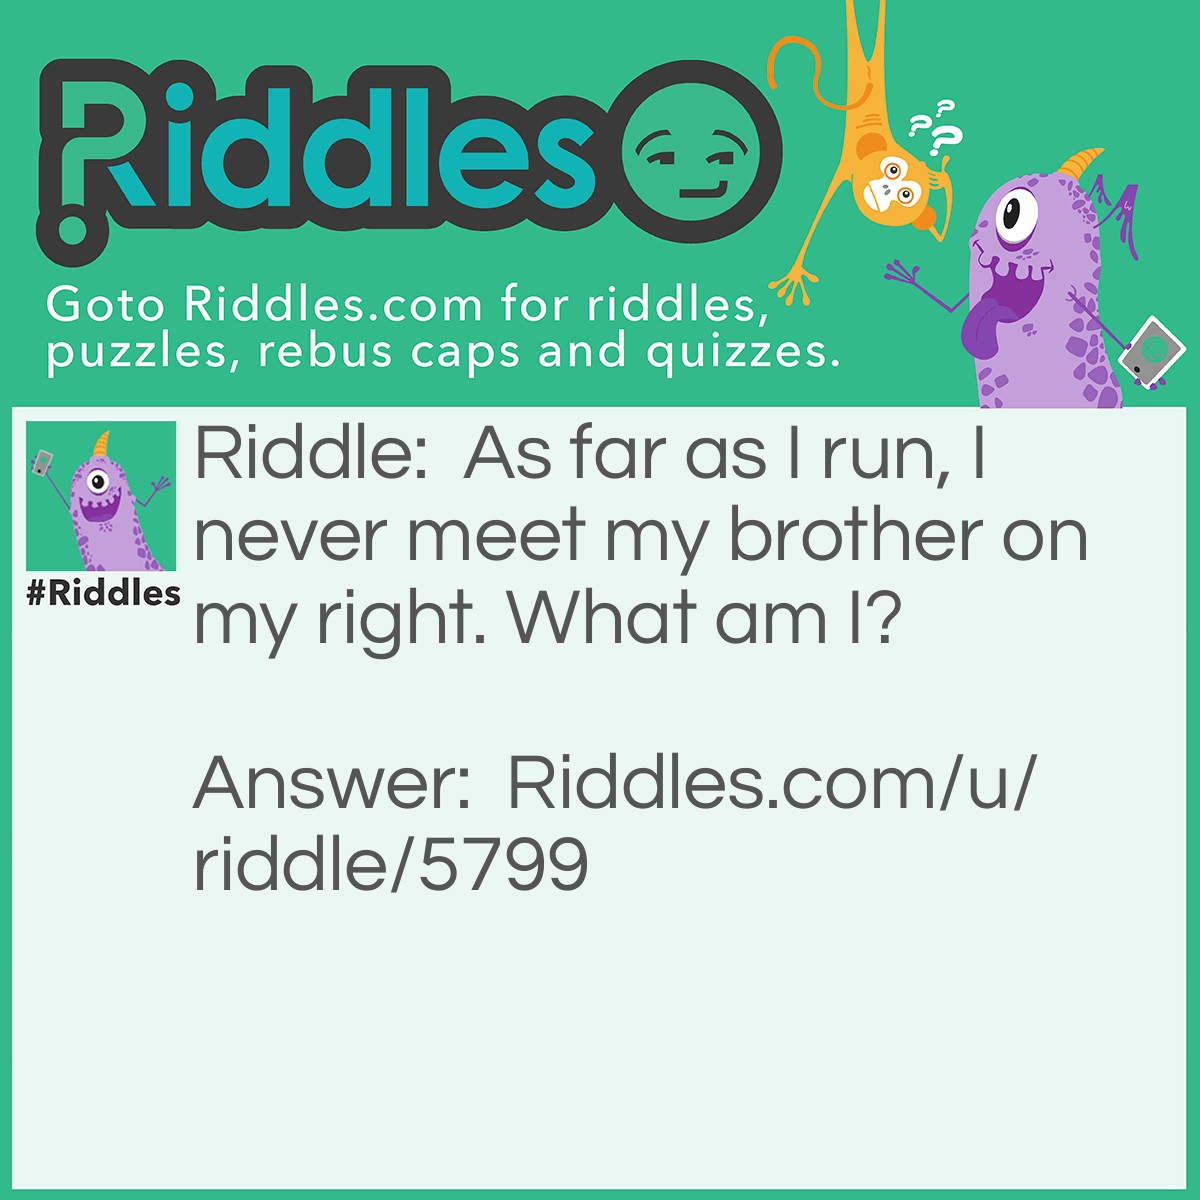 Riddle: As far as I run, I never meet my brother on my right. What am I? Answer: A wheel.